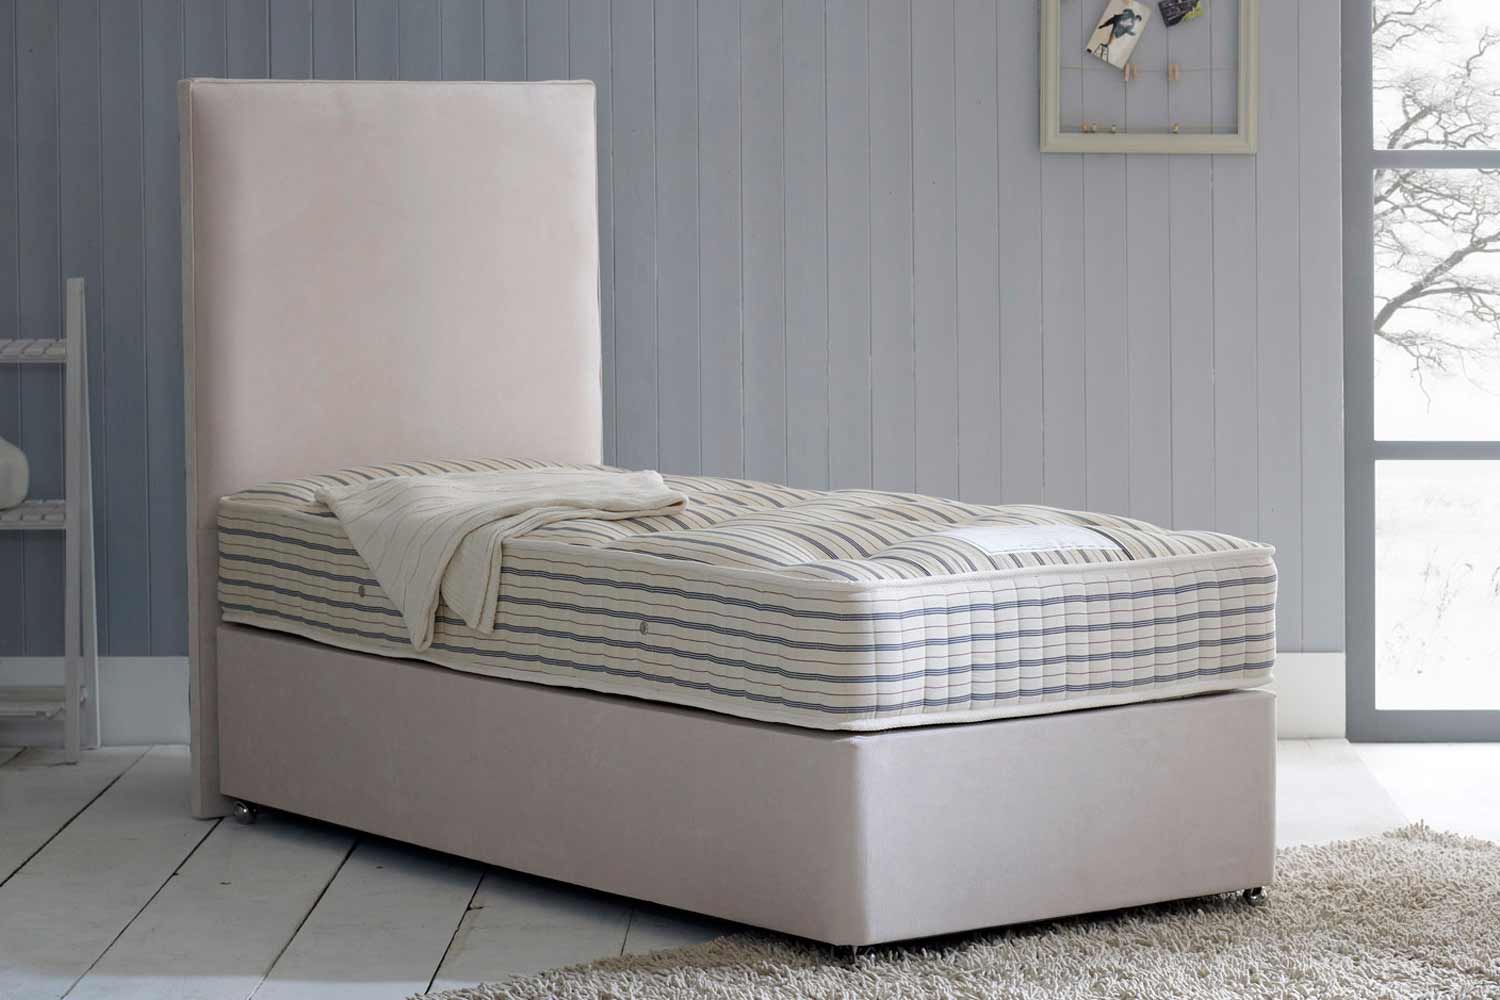 The Orignal Kids Cotton 1000 Pocket Spring Natural Divan Bed-Small Single-2 Drawers Same Side